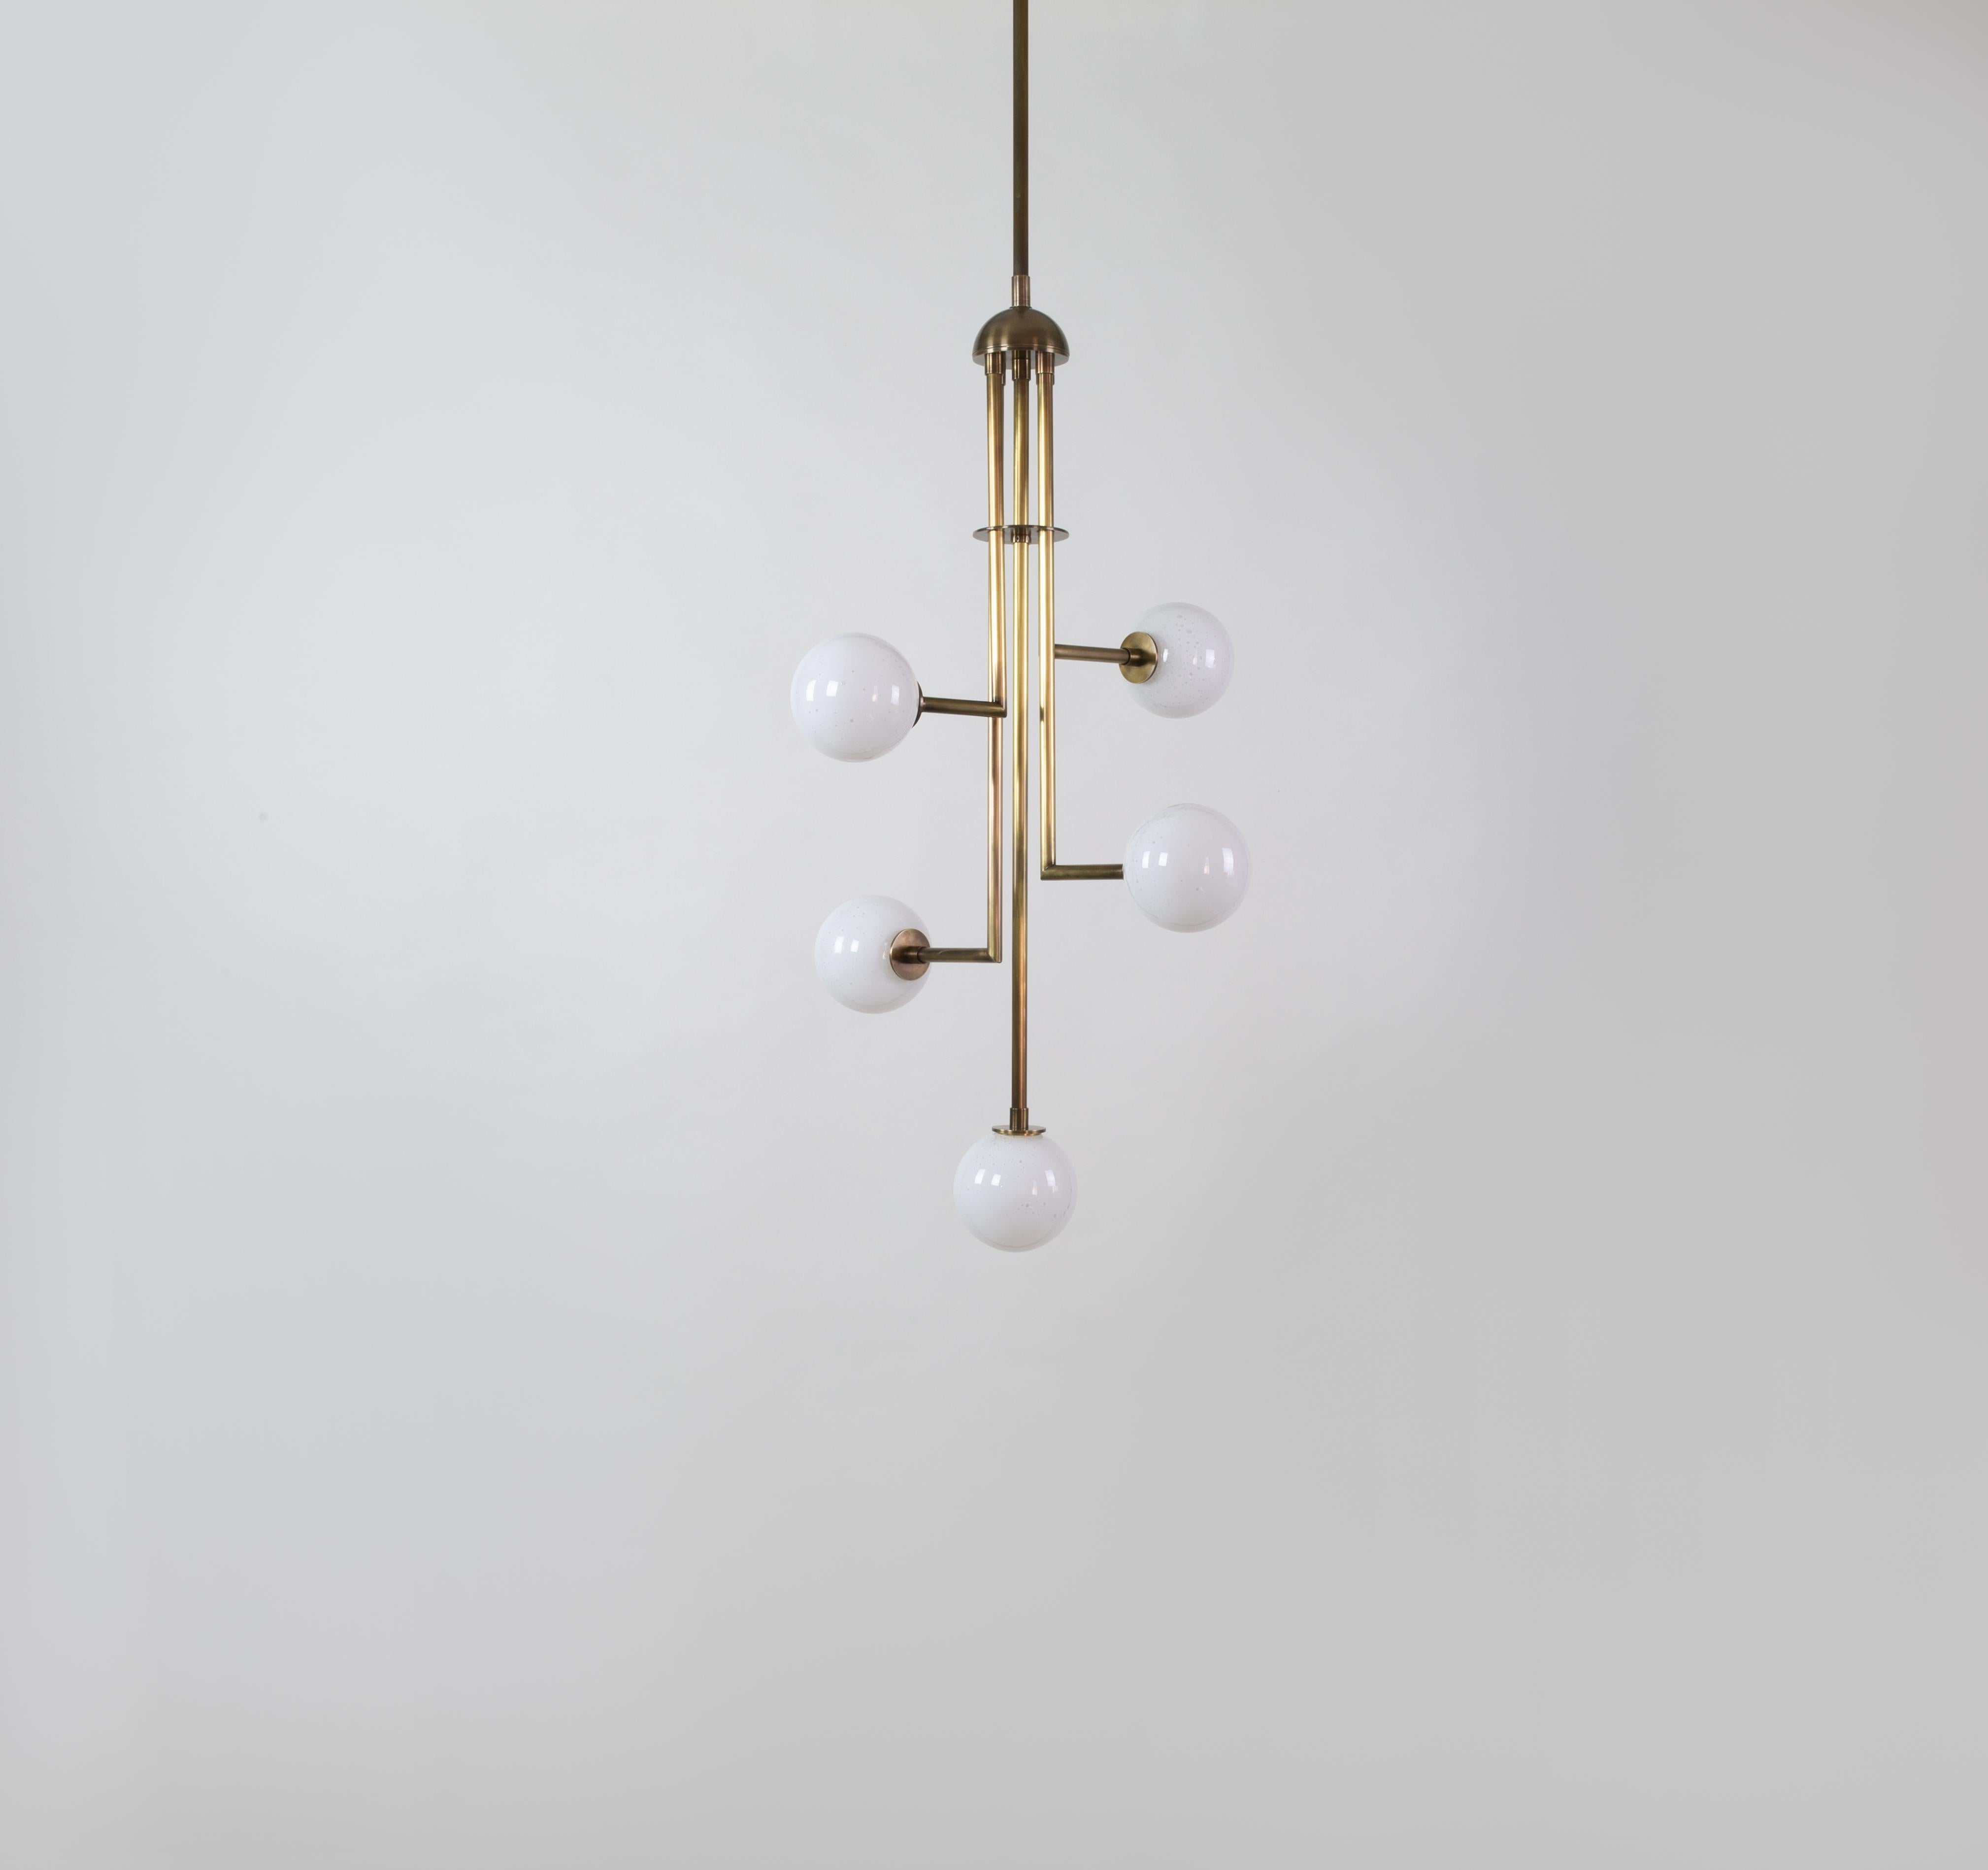 Kalin Asenov designs and fabricates lighting in Savannah, GA. Asenov works with a team of artisans and manufacturers to prototype, and build all pieces in his studio.

The design of Halo interprets ideas of celestial secret geometry; the form